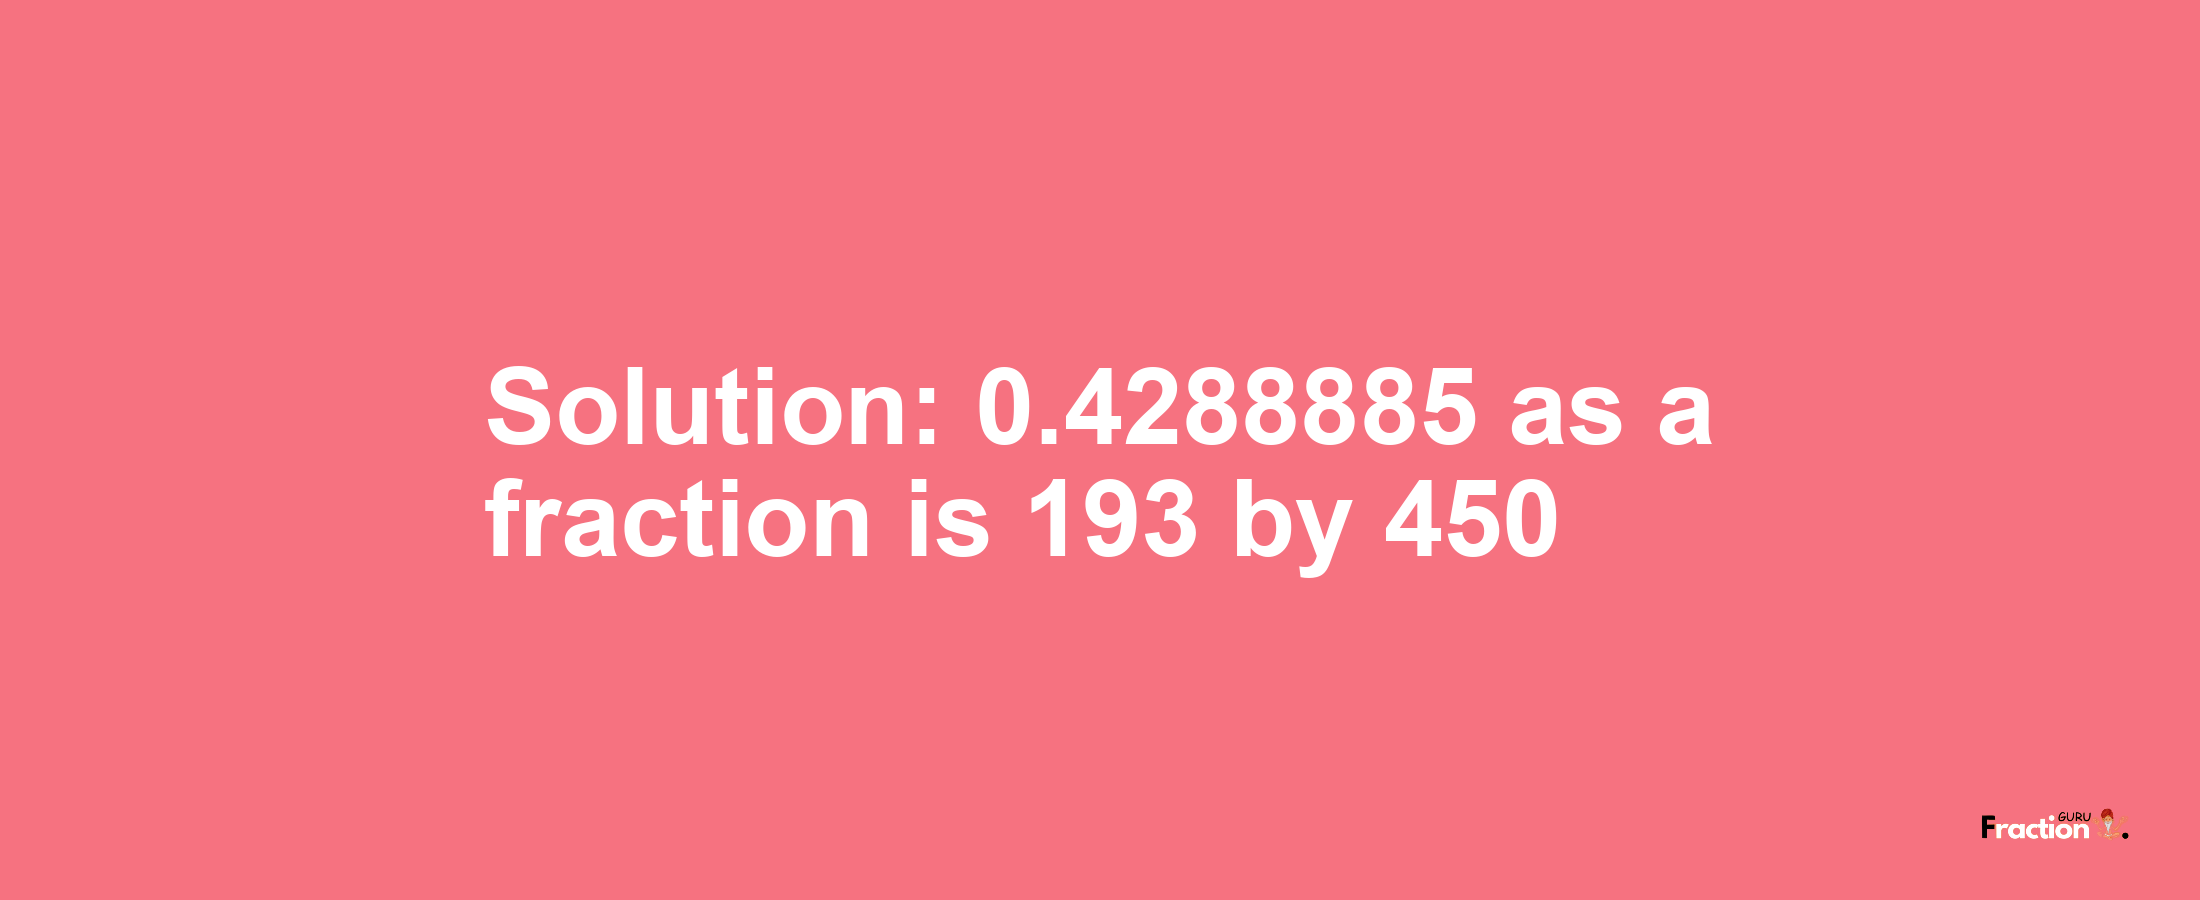 Solution:0.4288885 as a fraction is 193/450